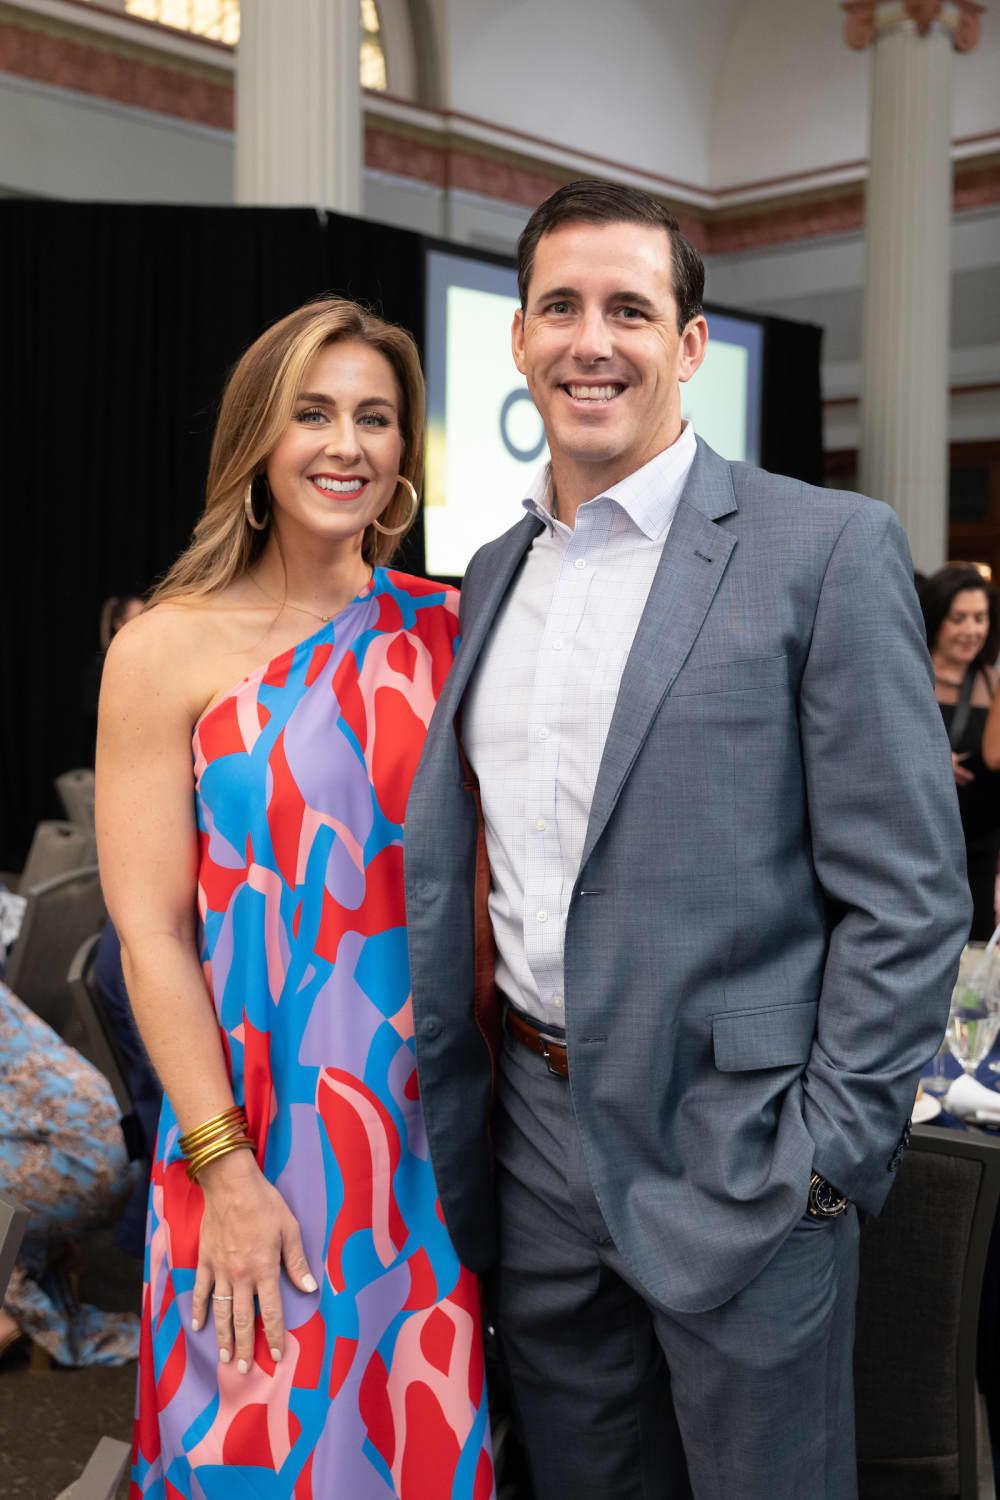 Prominent sports power couple lends a helping hand to deserving families at  $525,000 HelpCureHD gala - CultureMap Houston